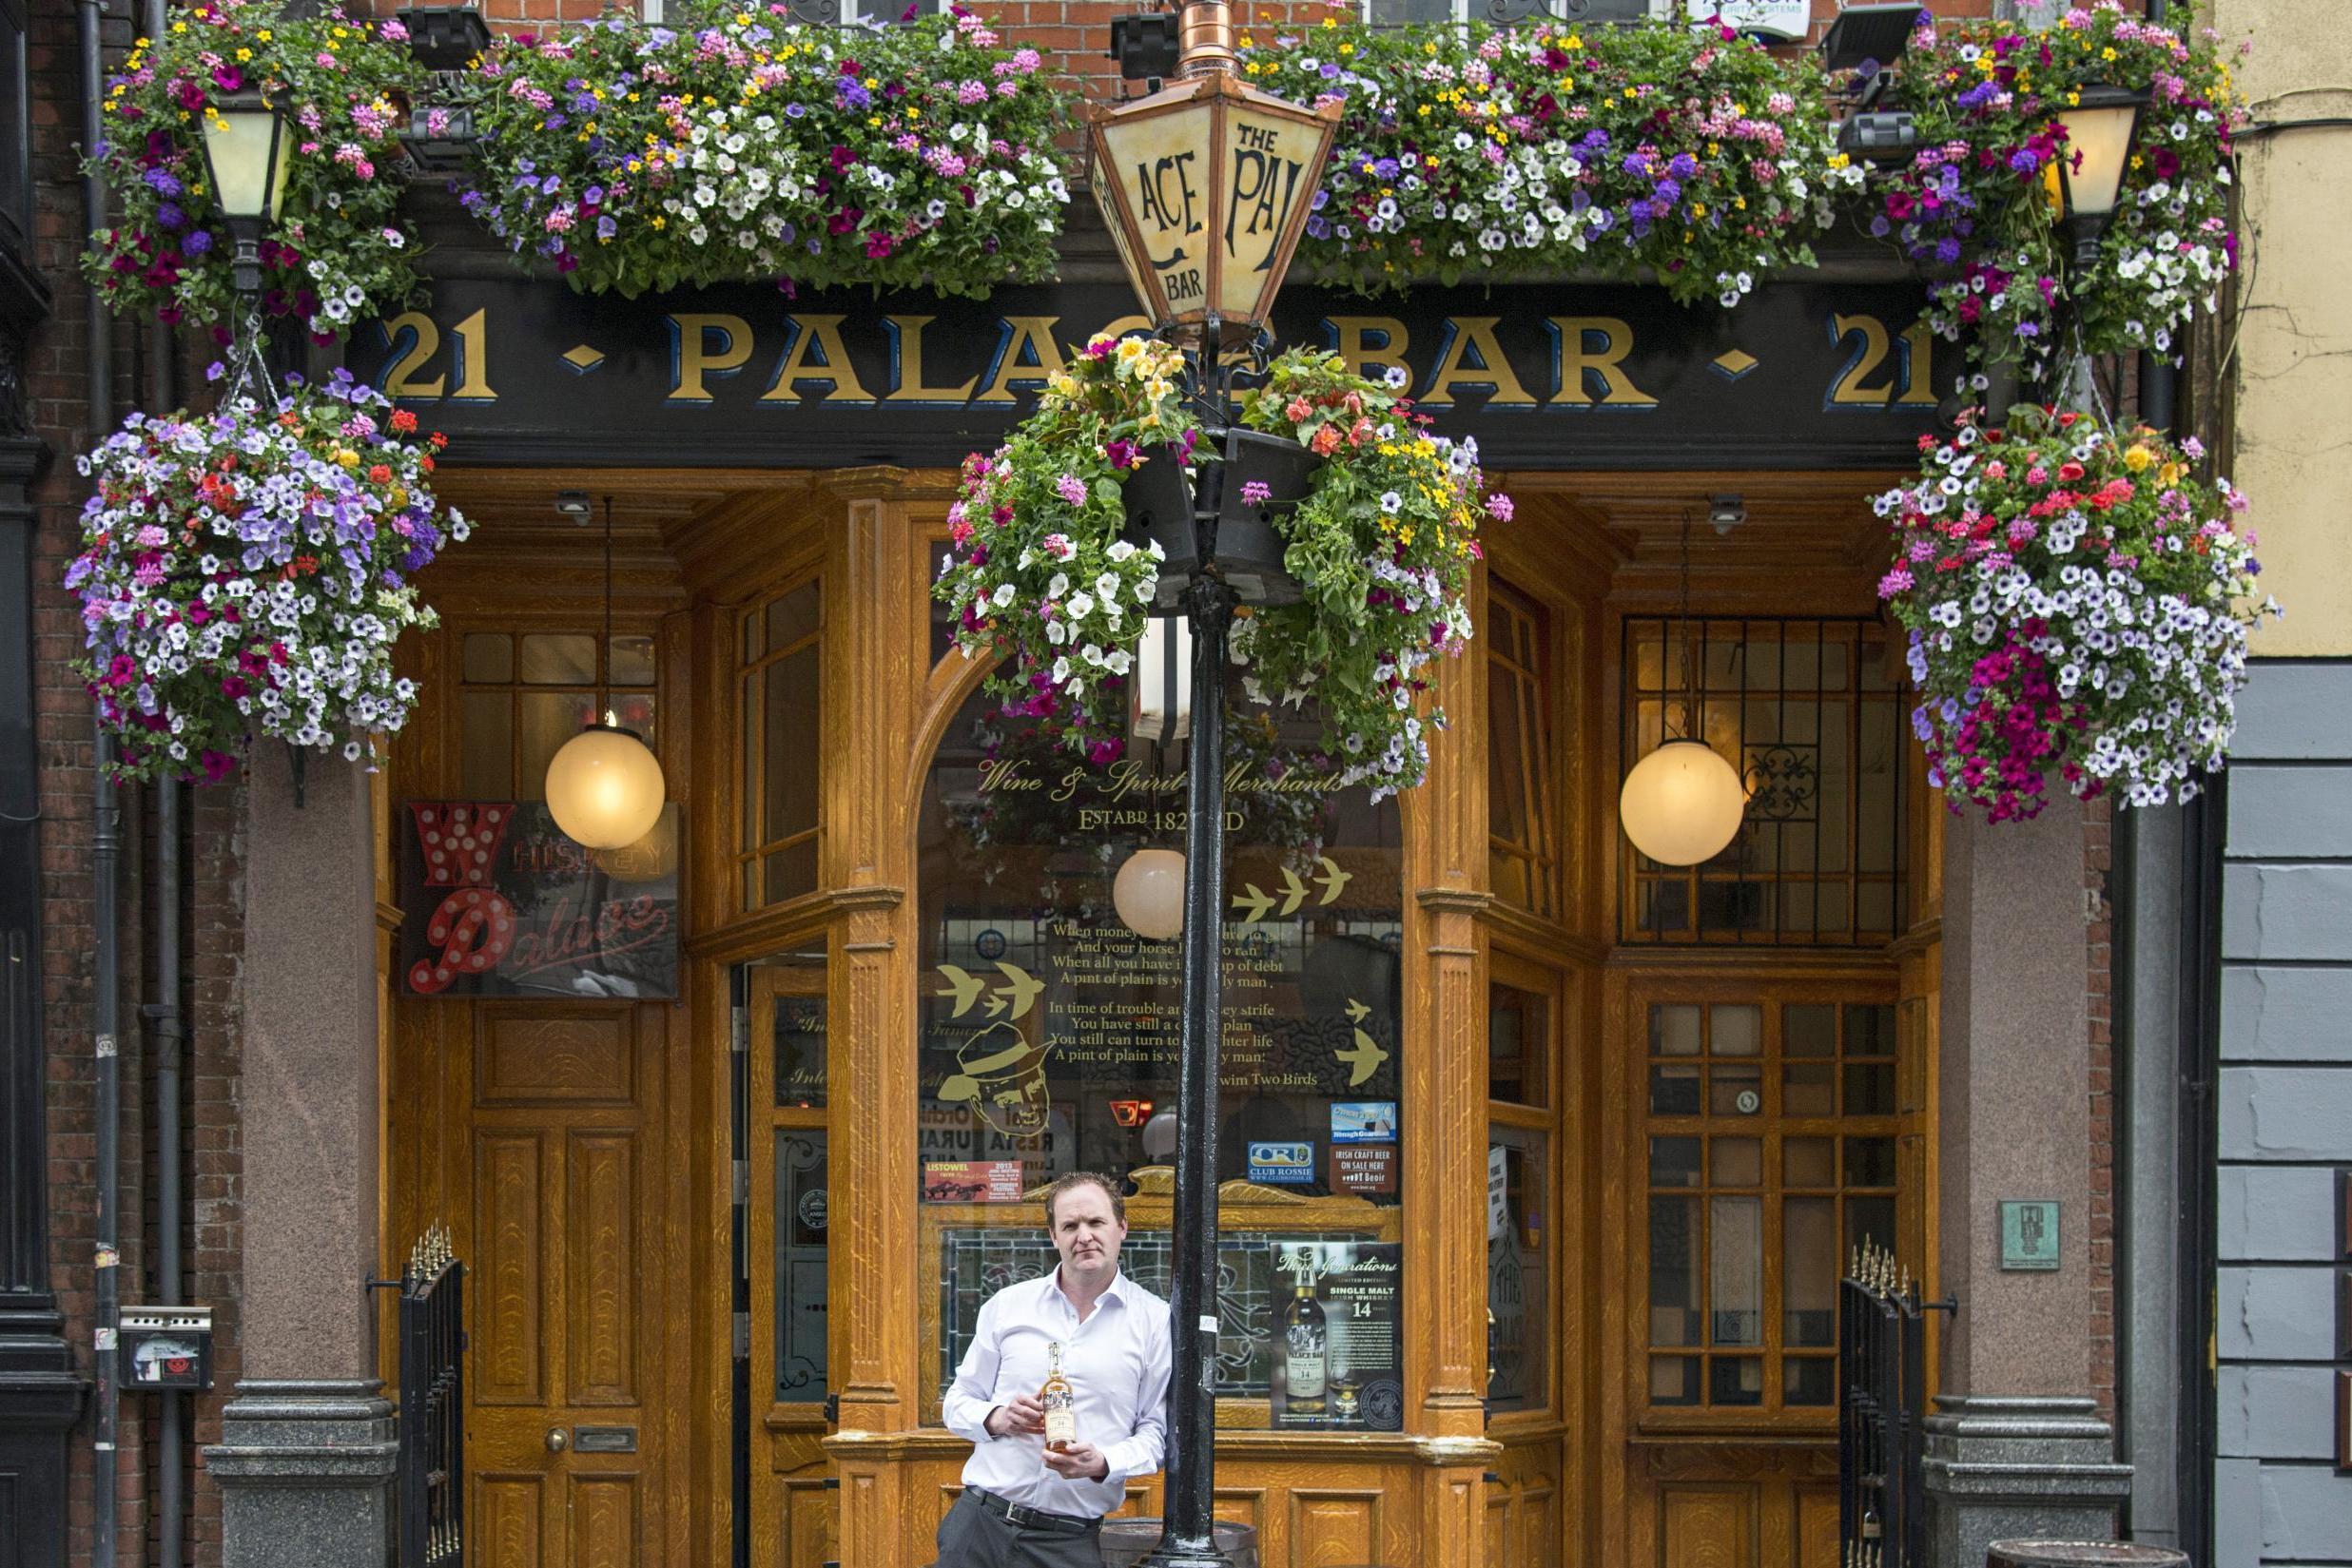 Spot the Palace Bar by its floral hanging baskets